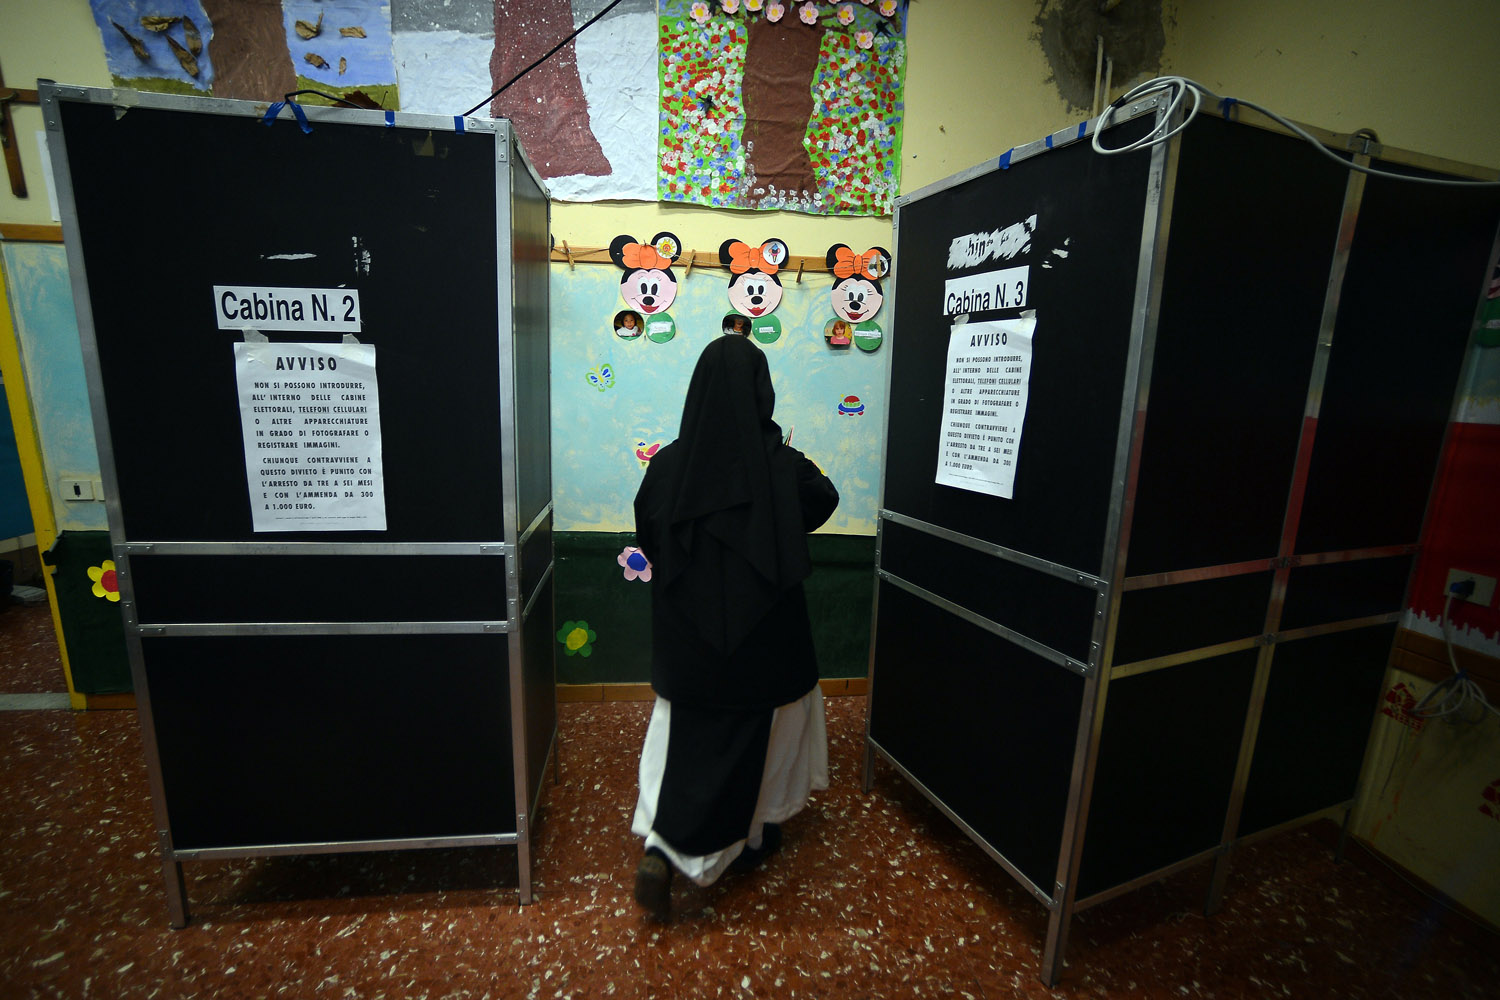 Feb. 24, 2013. A nun gets ready to vote at a polling station in downtown Rome.